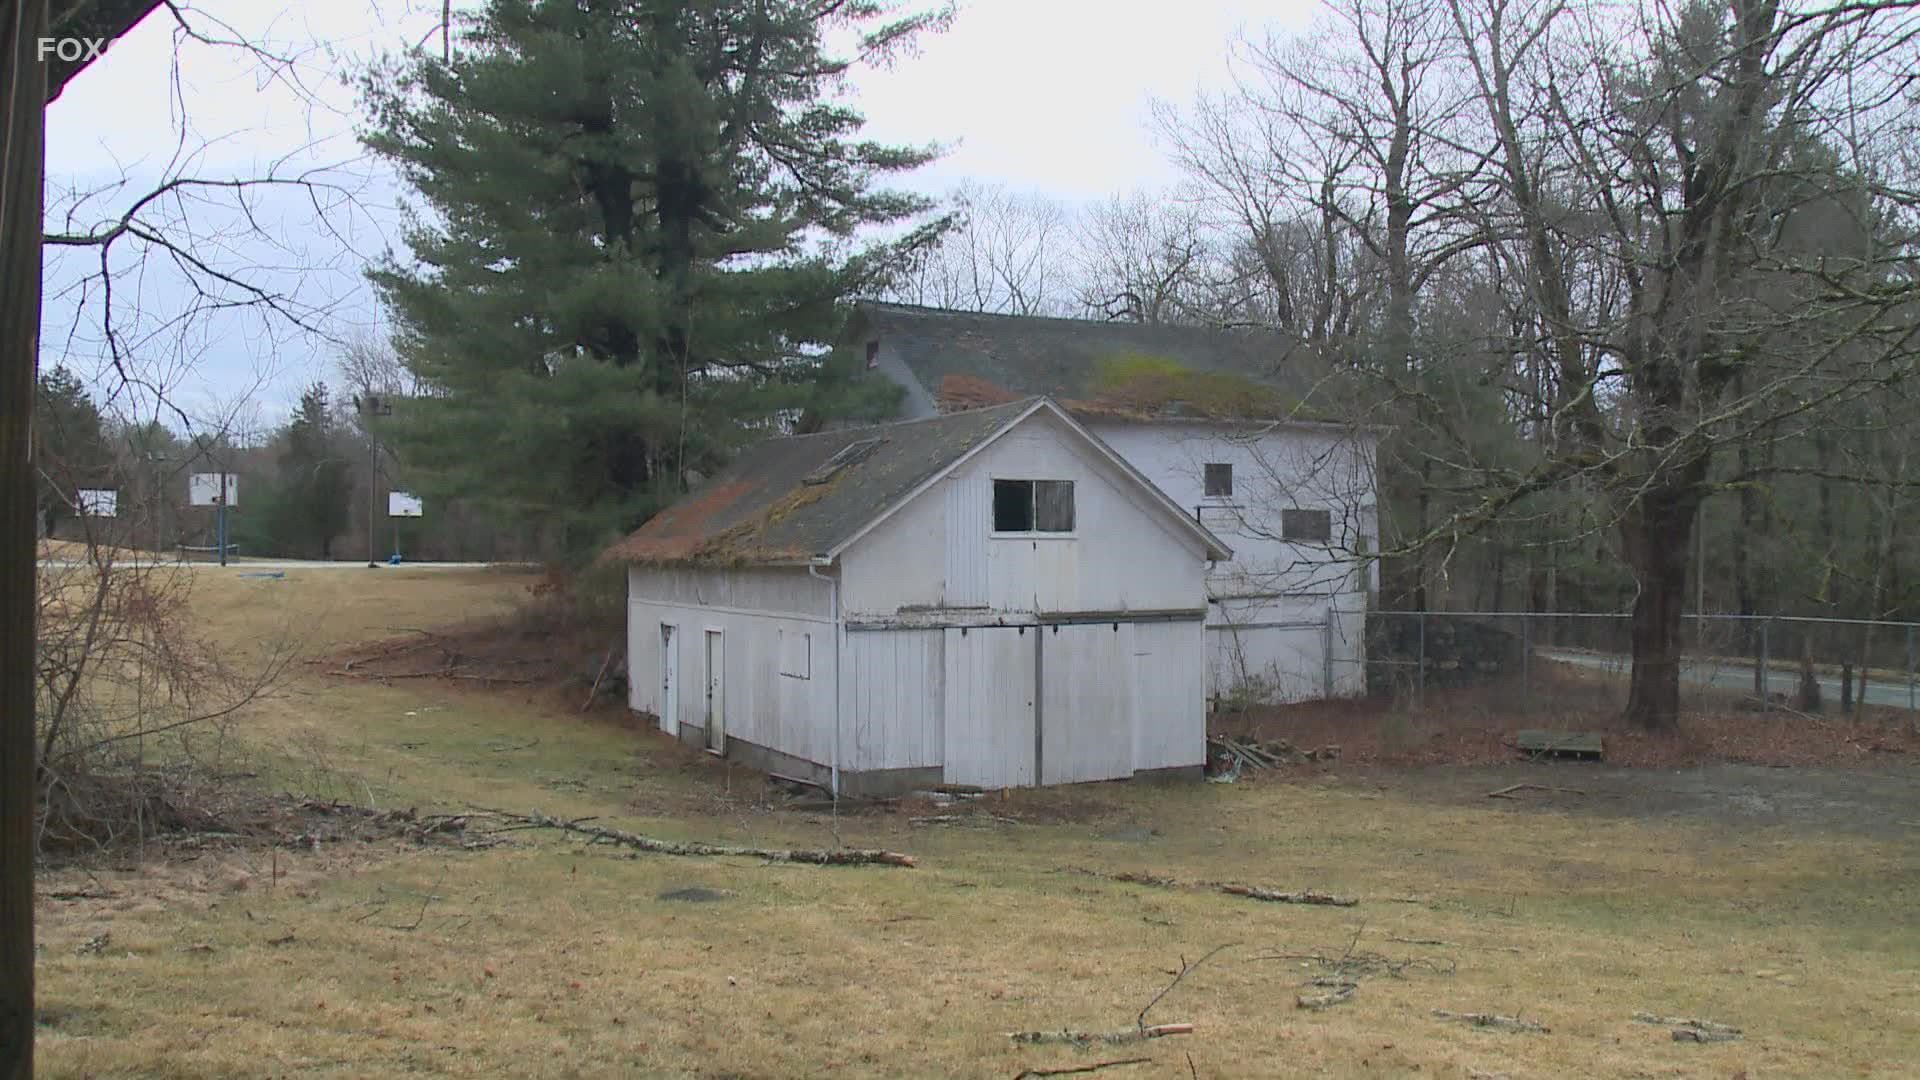 The camp, which is run by the Boys and Girls Club of New Britain, has been closed for the past several years after falling into disrepair.